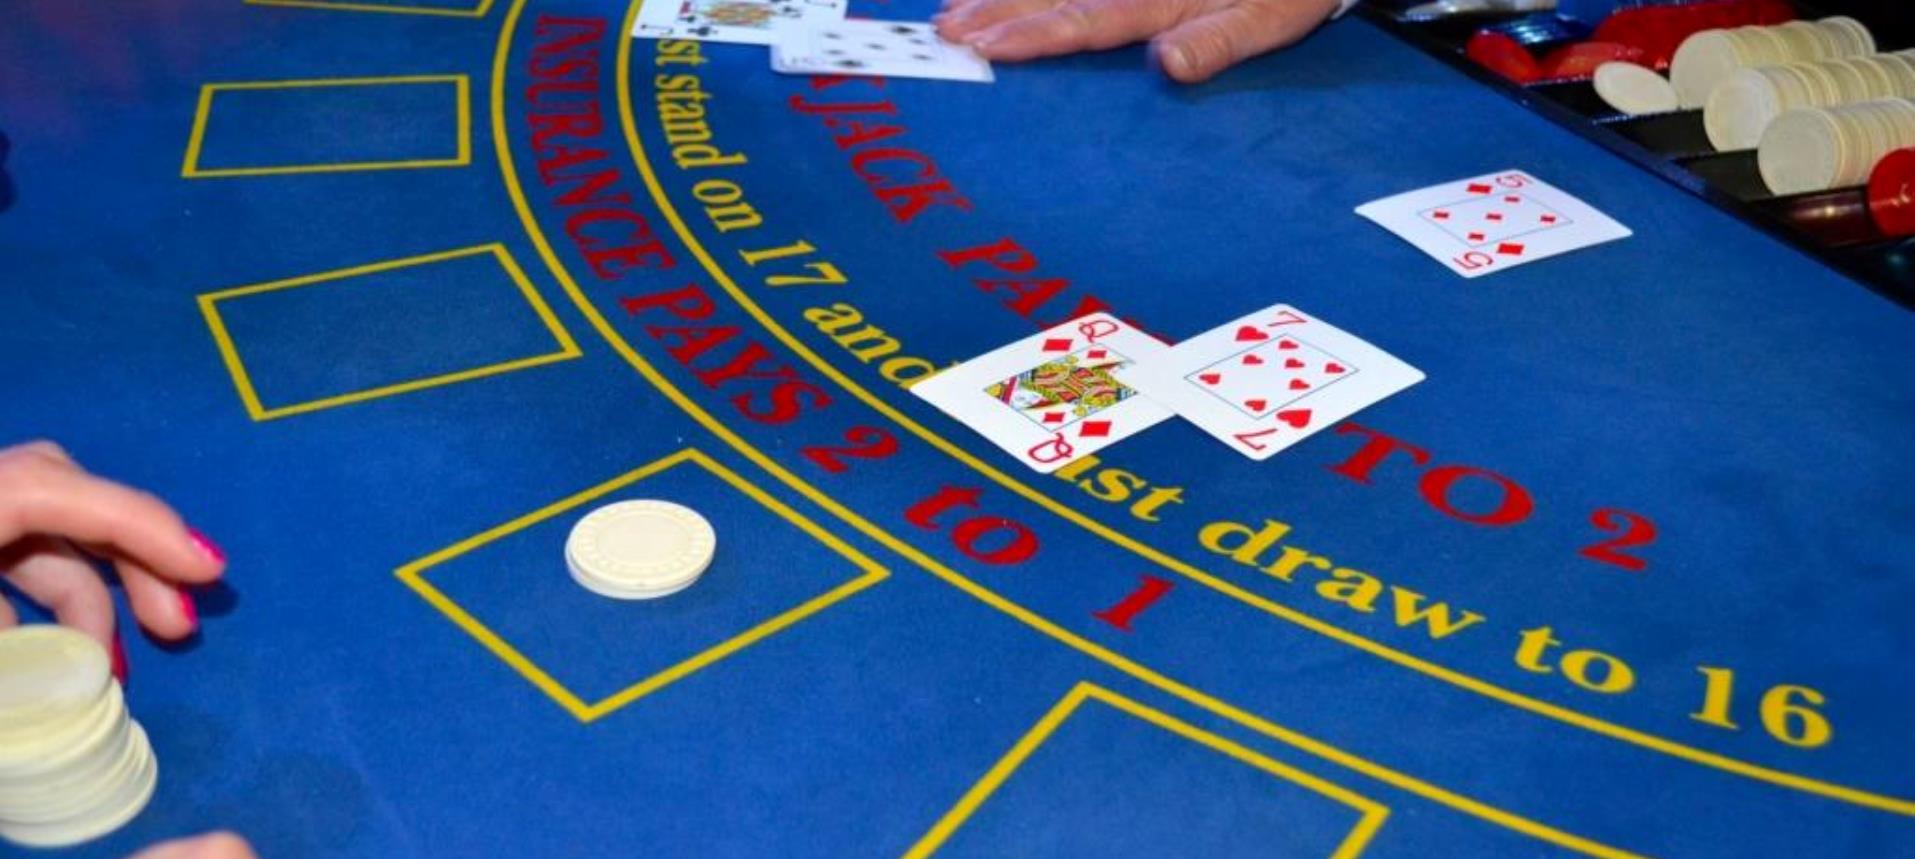 How to count cards in Blackjack